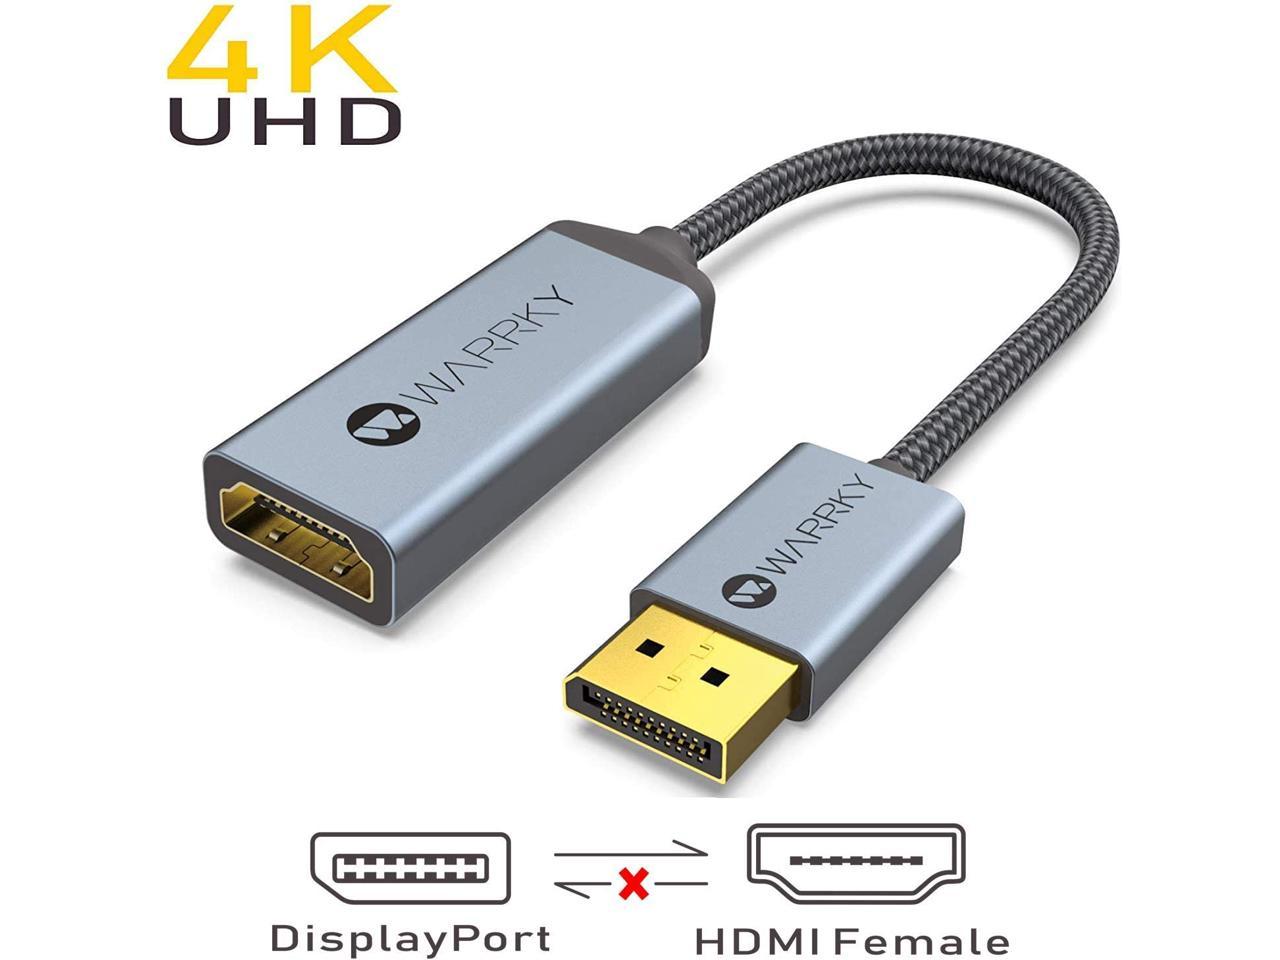 DELL More AMD NVIDIA Uni-Directional 4K UHD High Speed DP to HDMI Cable Compatible for Lenovo GPU WARRKY 10ft HP 4K DisplayPort to HDMI Cable Gold-Plated Connectors, Aluminum Shell